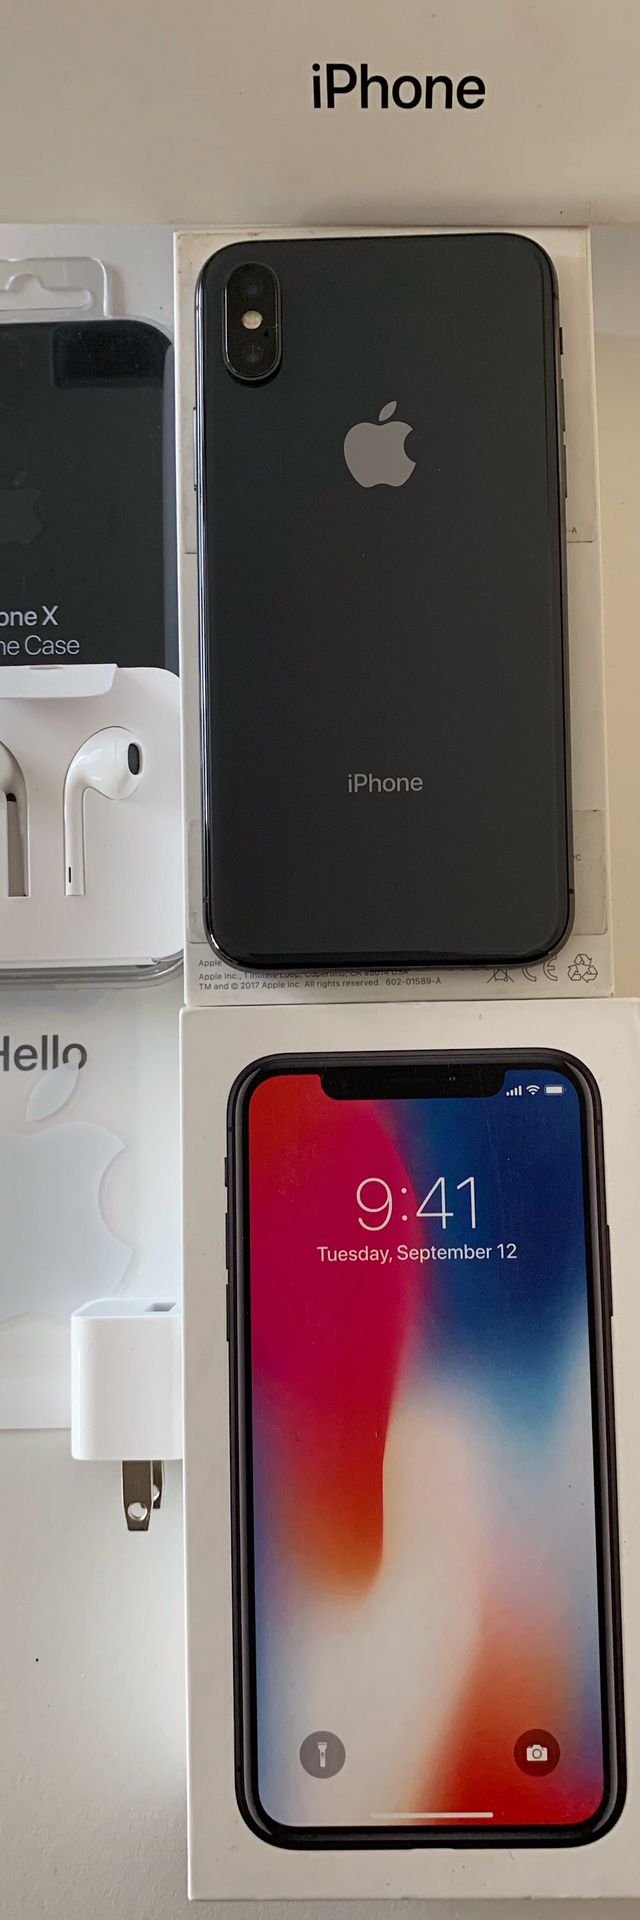 🔥 IPHONE X 256GB UNLOCKED WORKS WITH ANY CELLPHONE COMPANY WE CAN MEET AT ANY CELLPHONE STORE VERIFY EVERYTHING WORKS💯%👍🏼